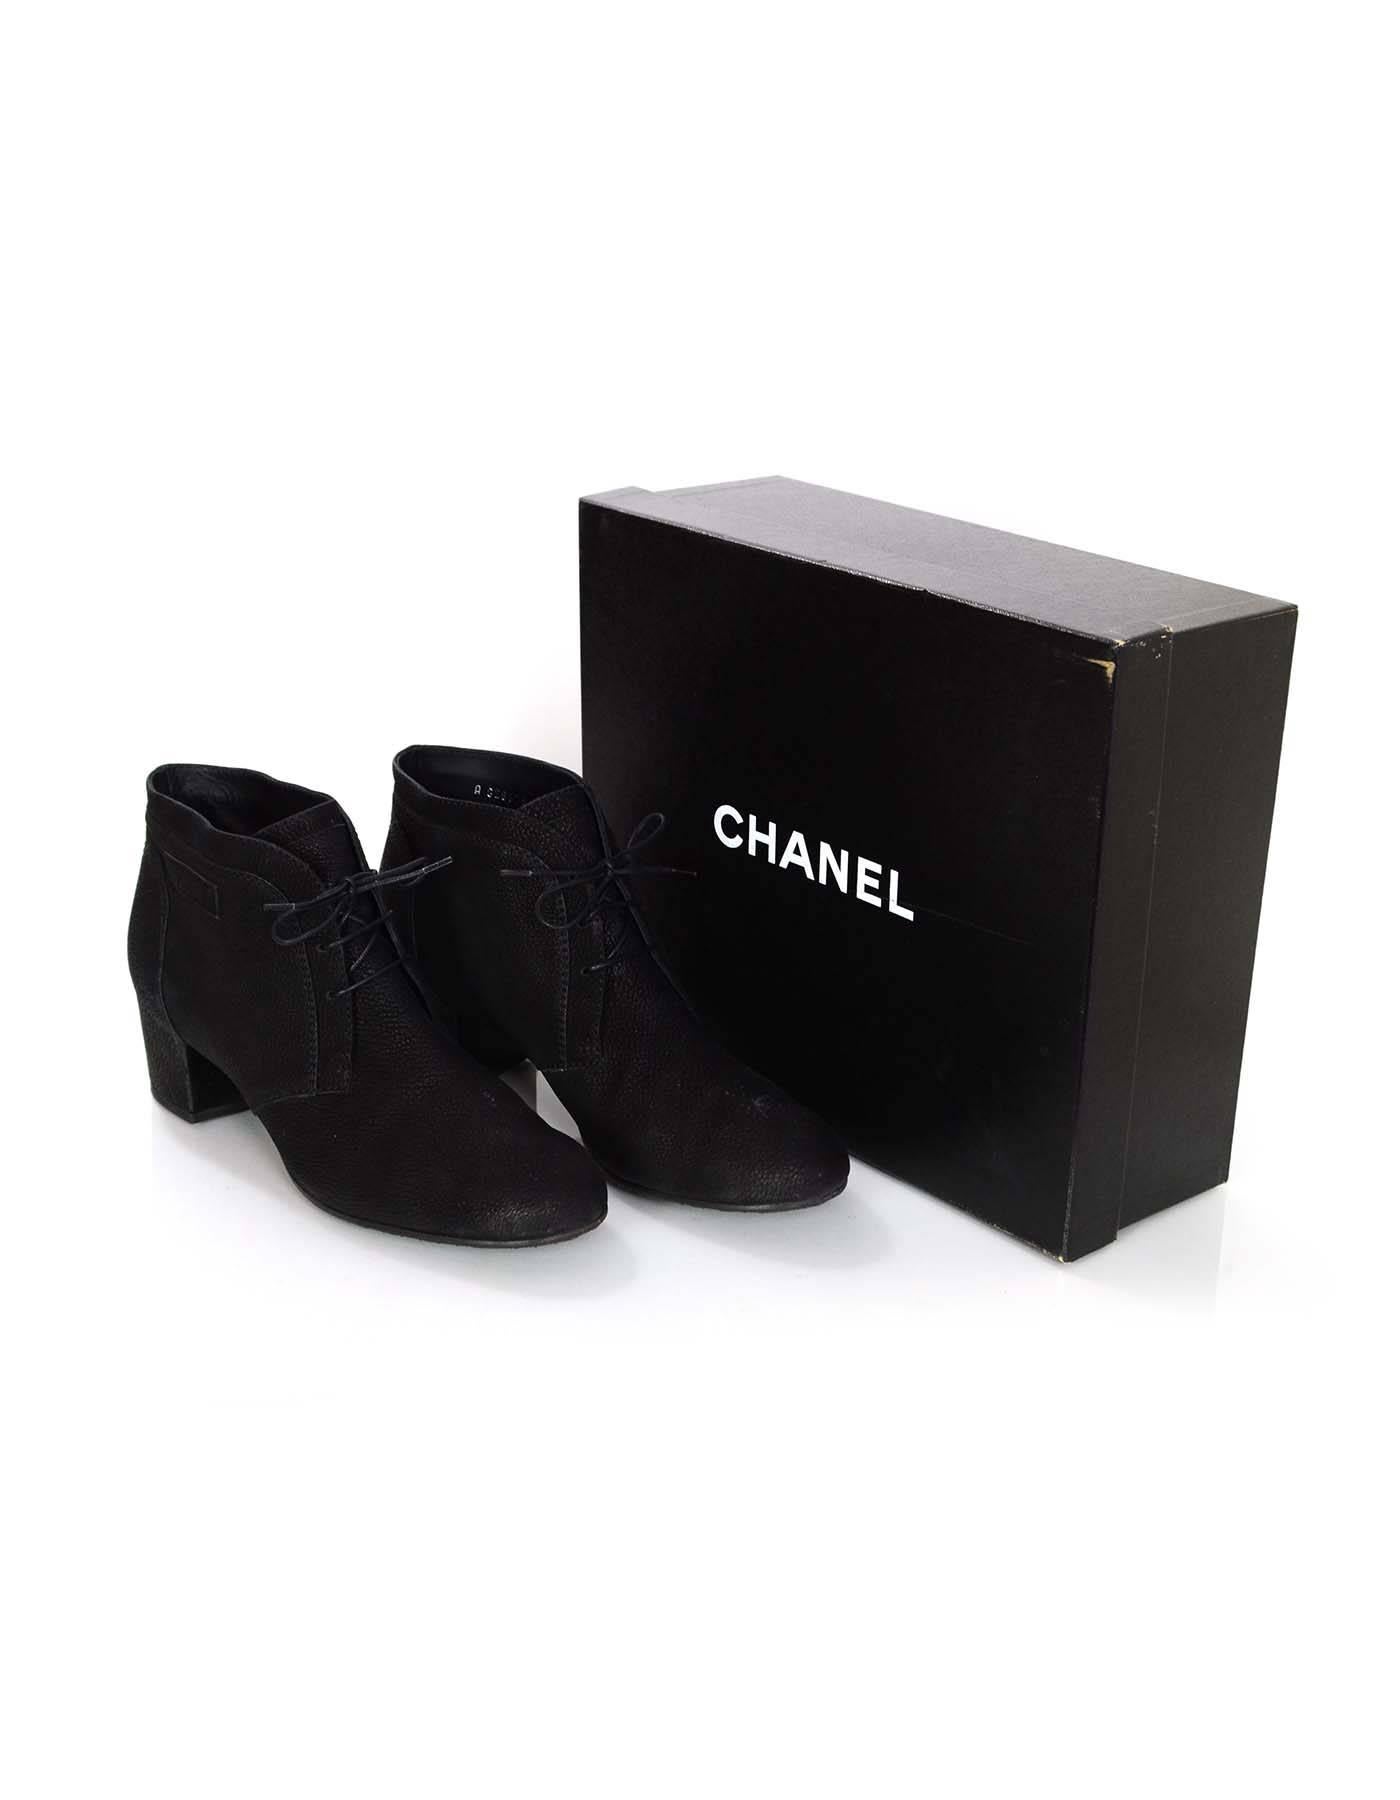 Chanel Black Suede Lace Up Heeled Ankle Boots Sz 42 3